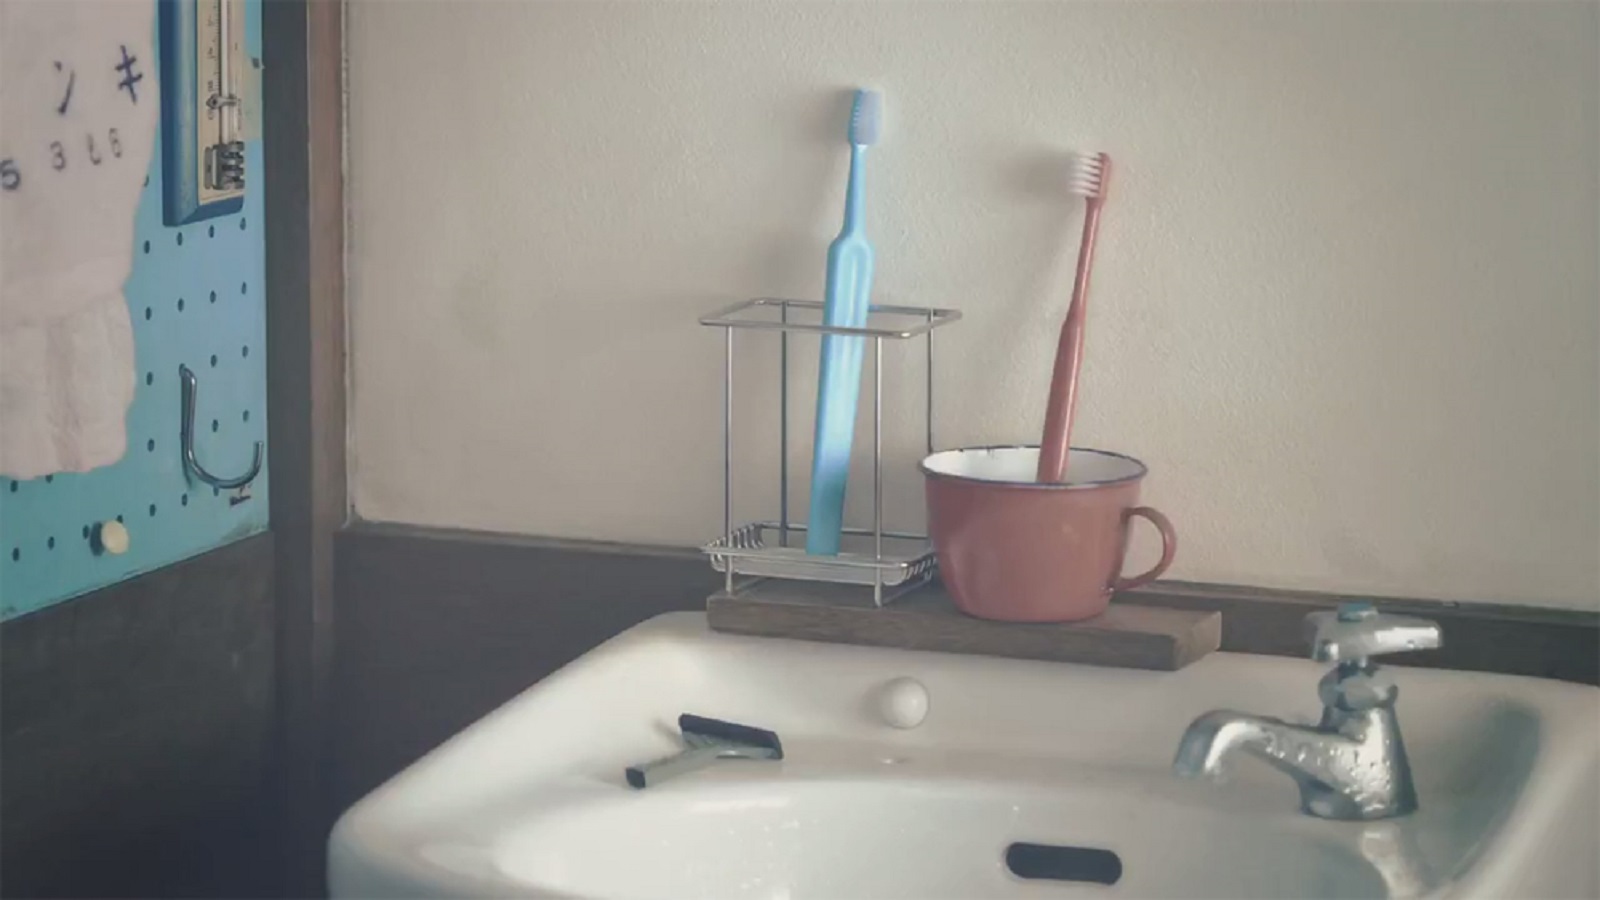 #TBT: Cutest Toothbrush Ad Highlights the Gift of Love